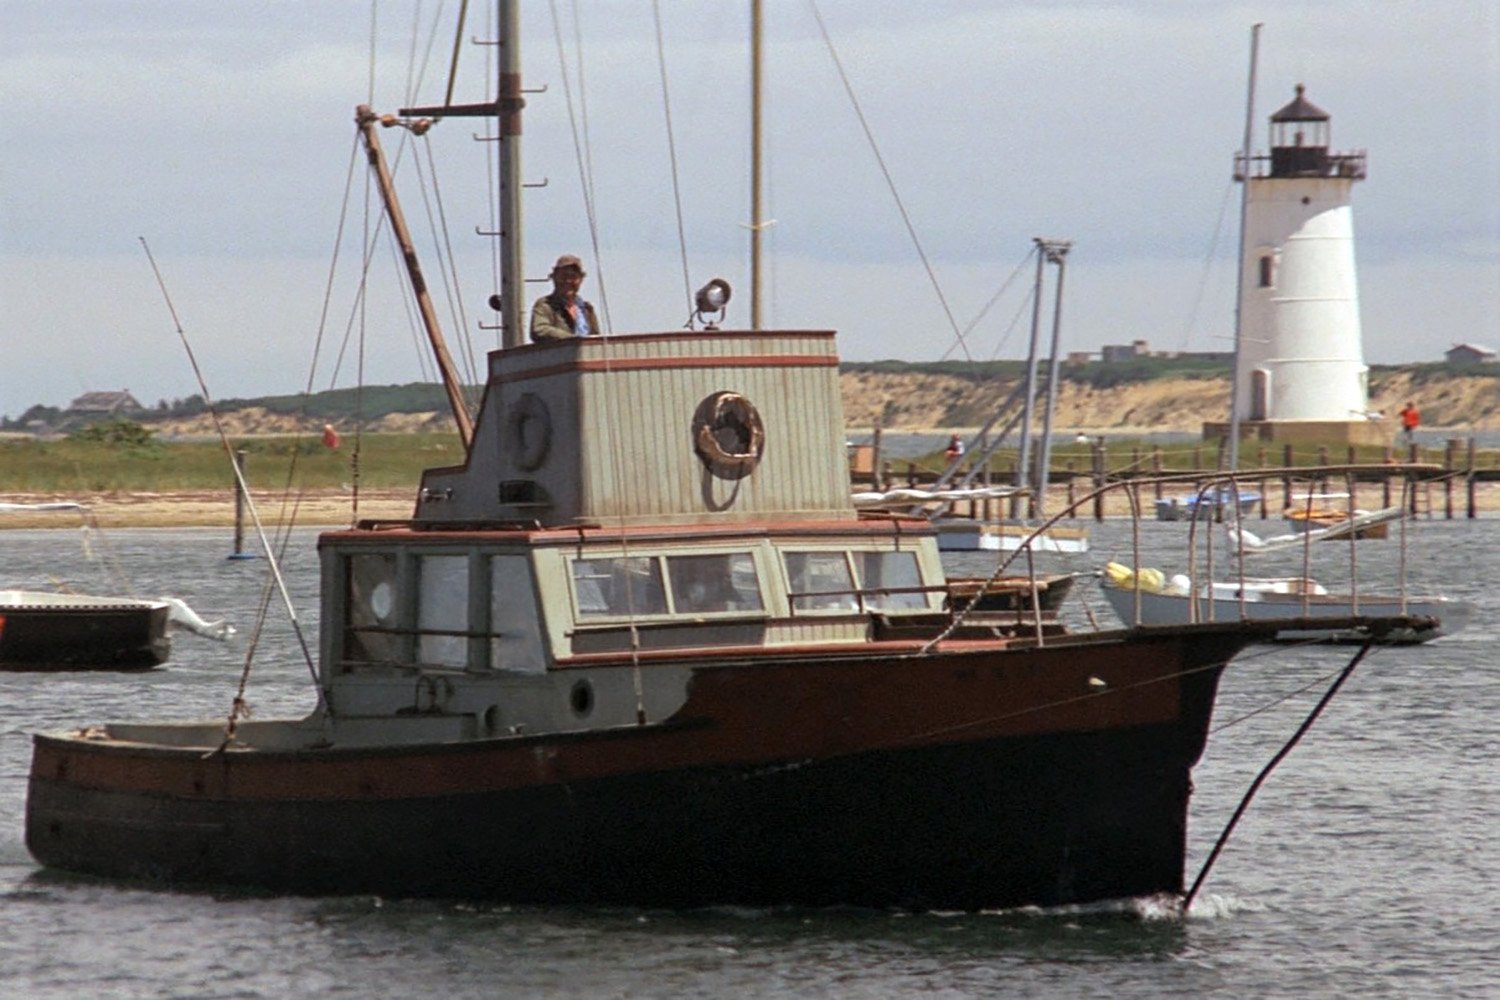 The Daily Jaws no Twitter: "Even though bigger boats are available, we all love the #Orca. But what happened to the actual boat used in #Jaws? To quote #Quint, it's not going